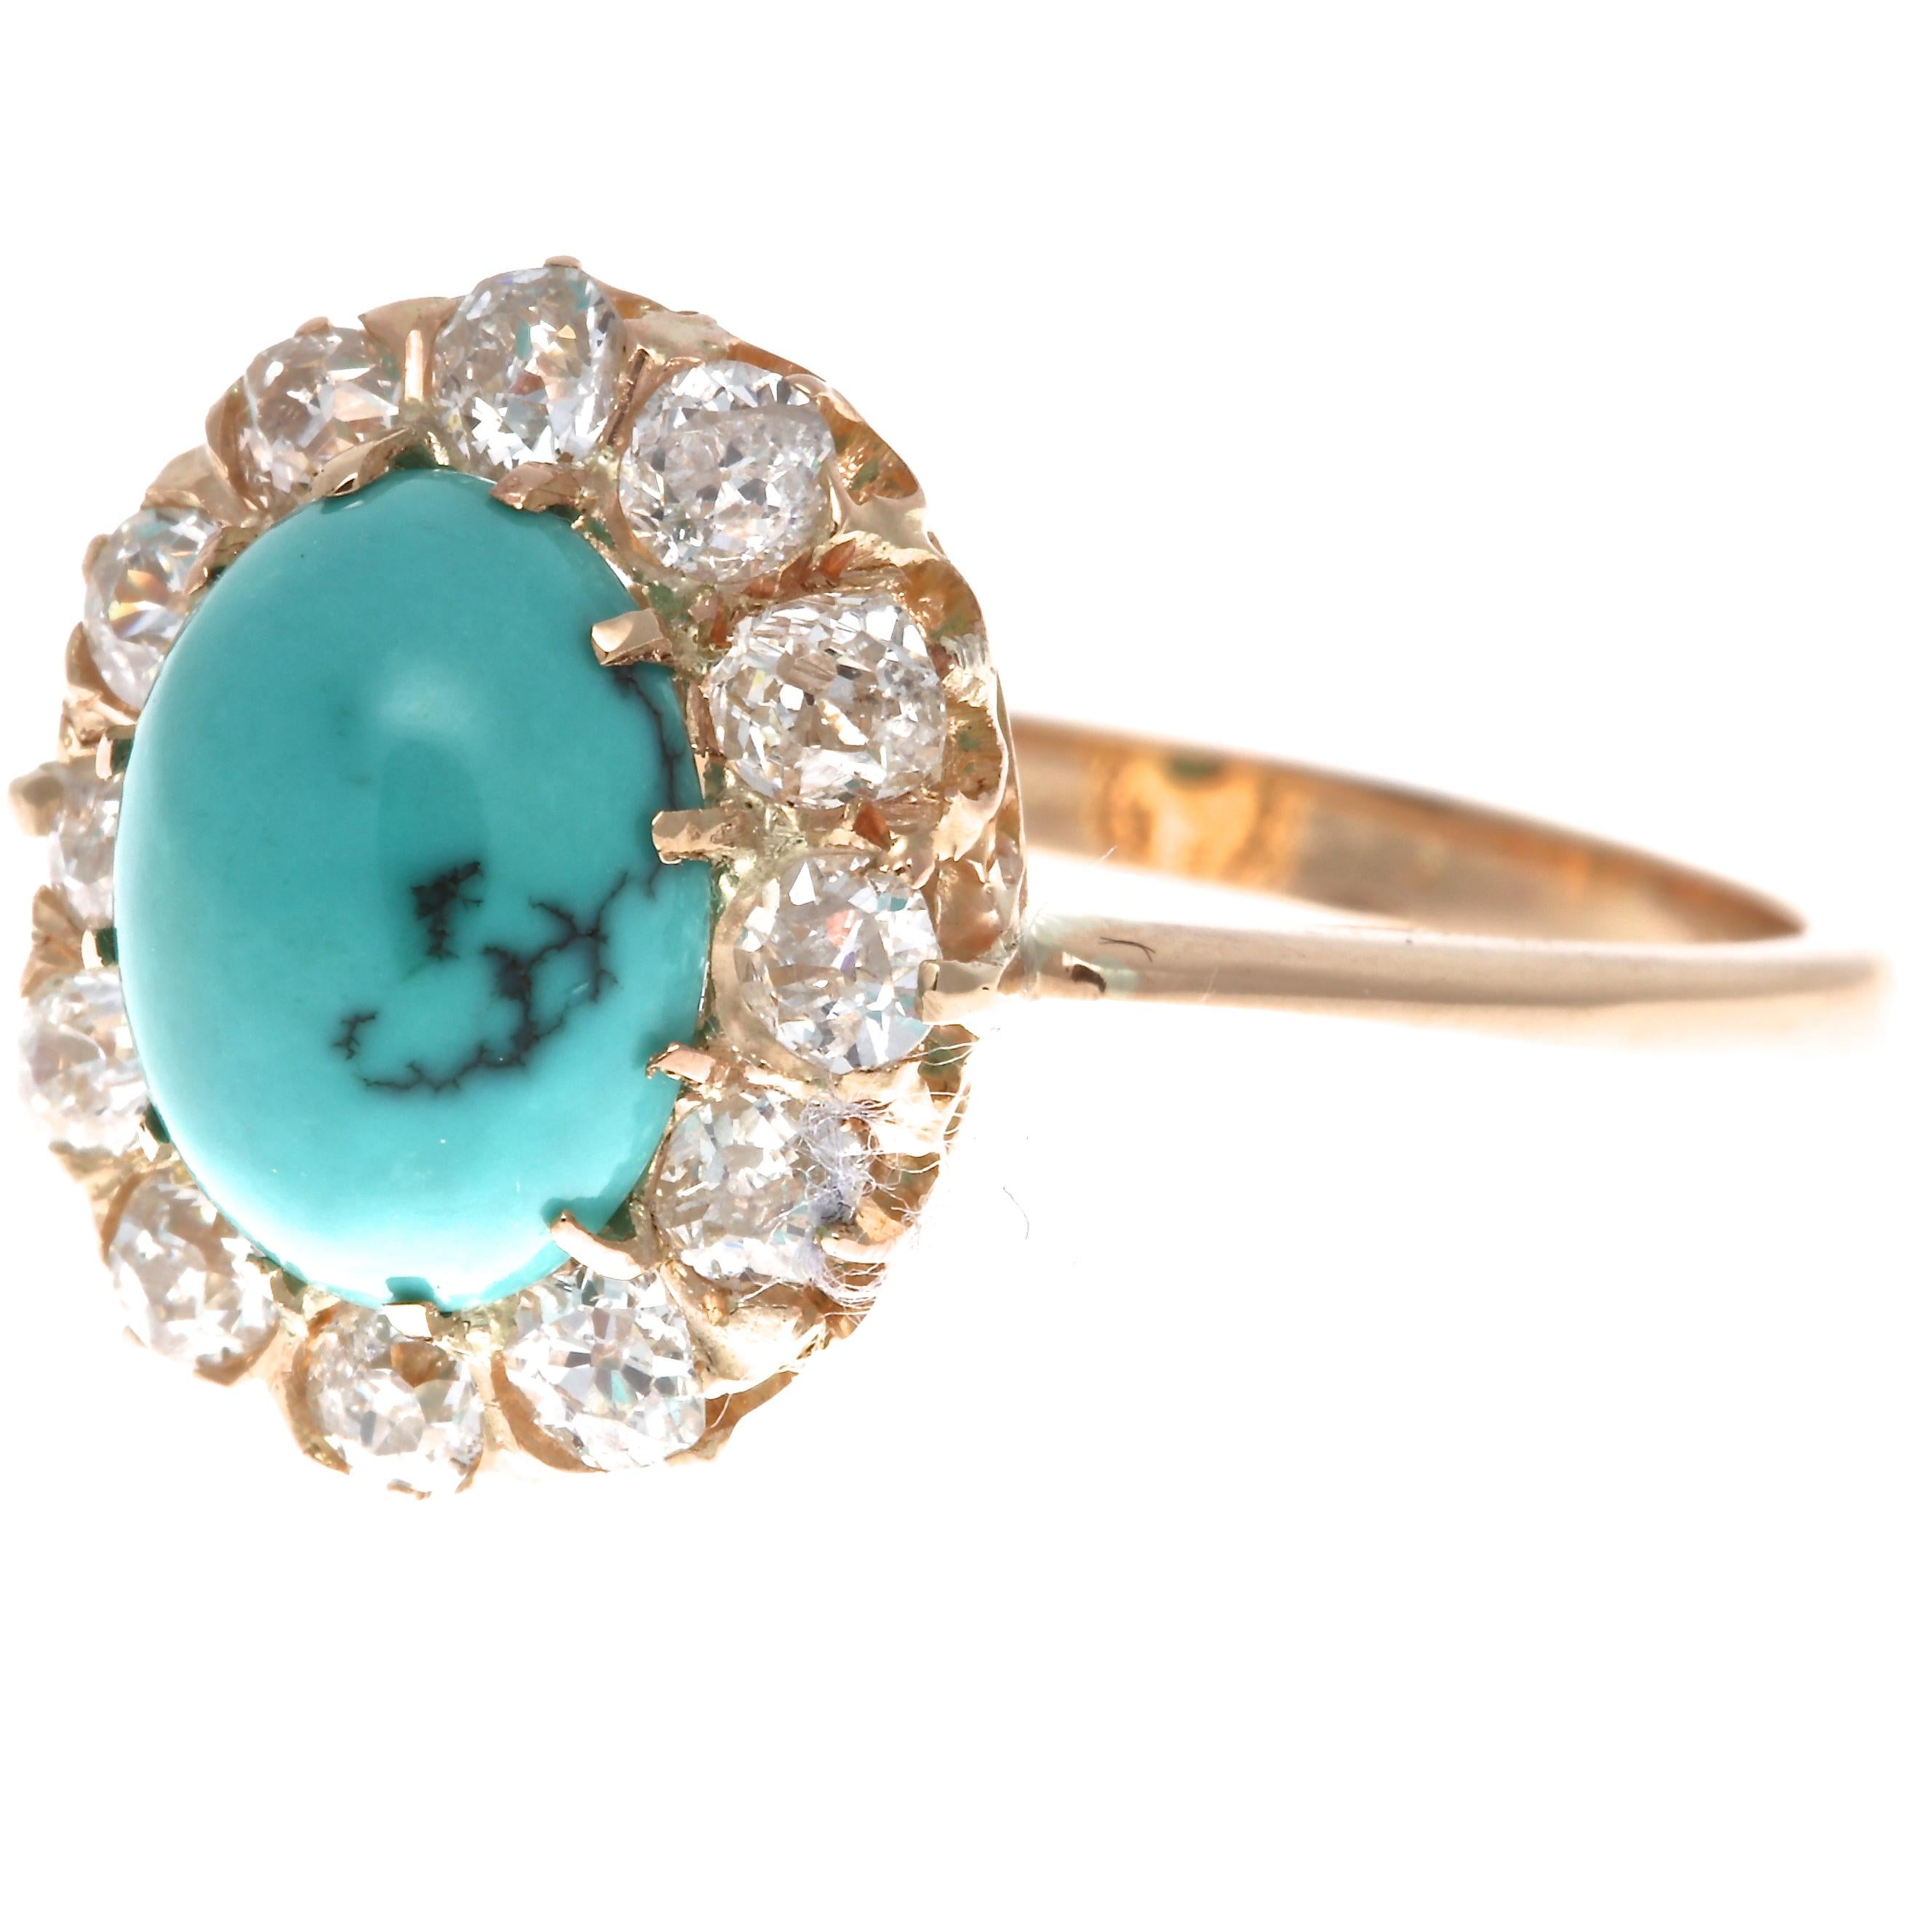 Stylishly timeless the halo ring has ingrained itself in jewelry as one of the most iconic creations. Featuring a vibrantly multihued bluish-green cabochon cut turquoise that is surrounded by a halo of old cut diamonds. Hand crafted in 18k gold.